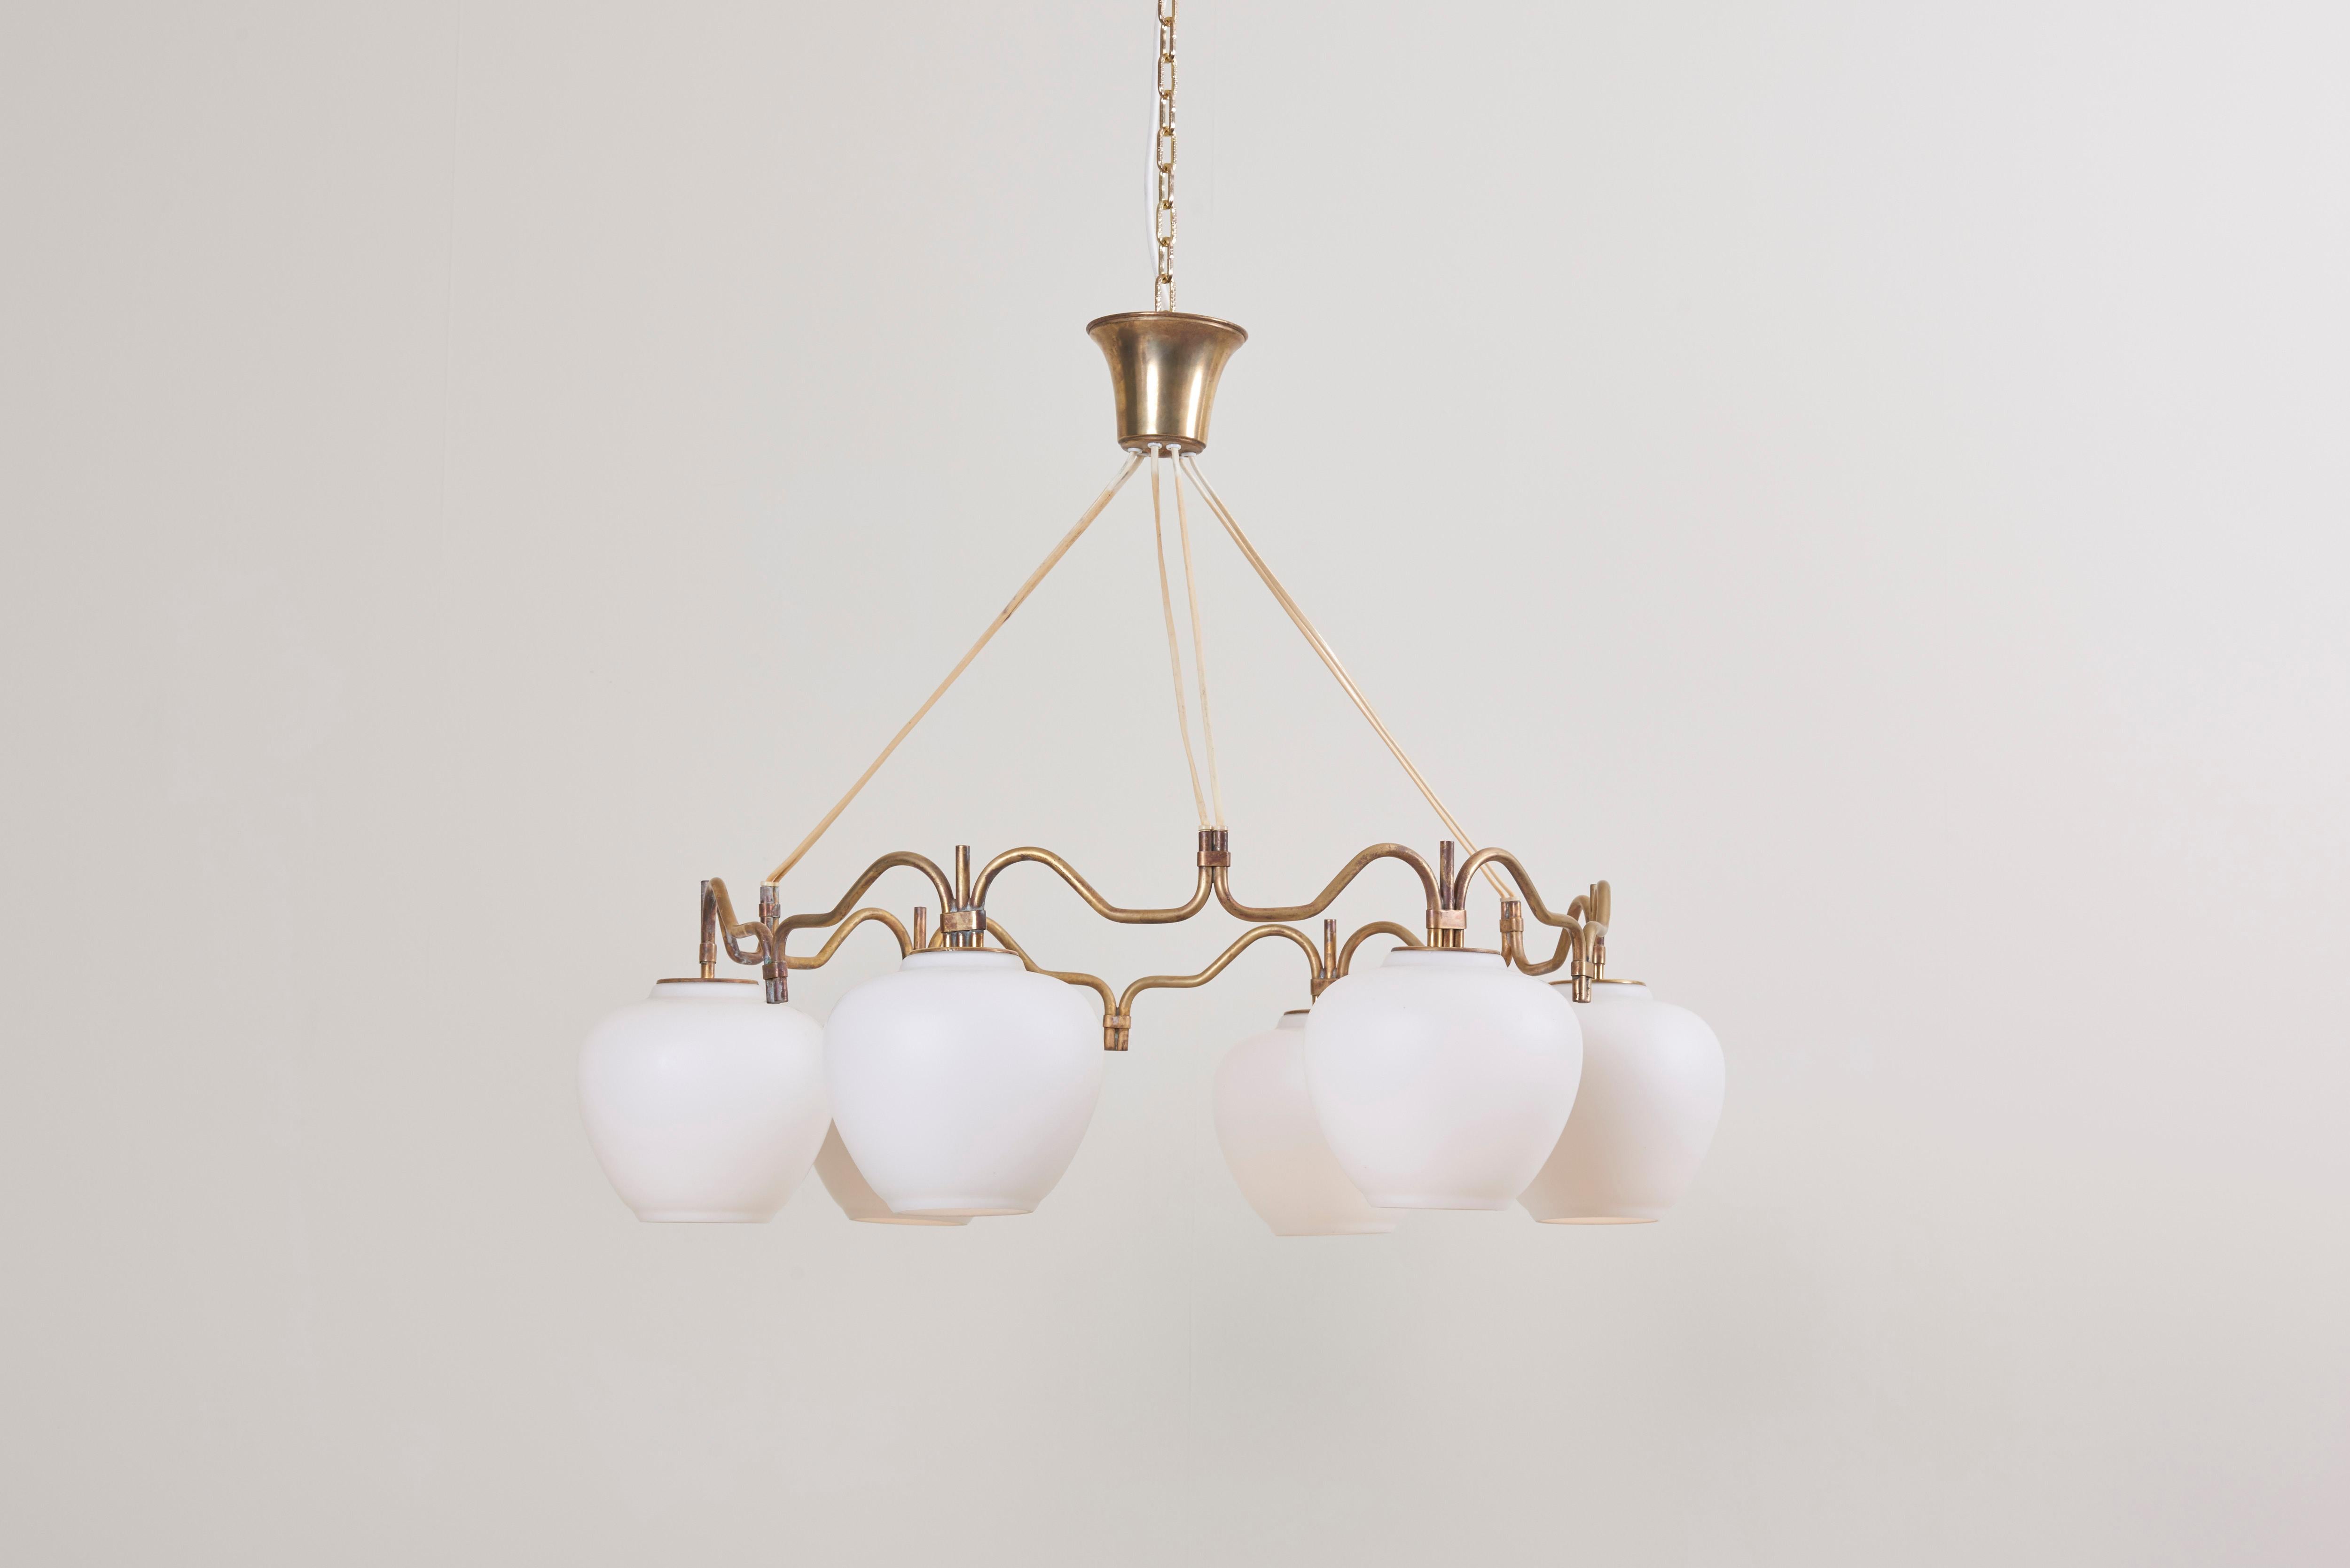 A round brass chandelier with six opaline glass shades, by Bent Karlby for Lyfa. The brass shows a beautiful patina.

To be on the safe side, the lamp should be checked locally by a specialist concerning local requirements.